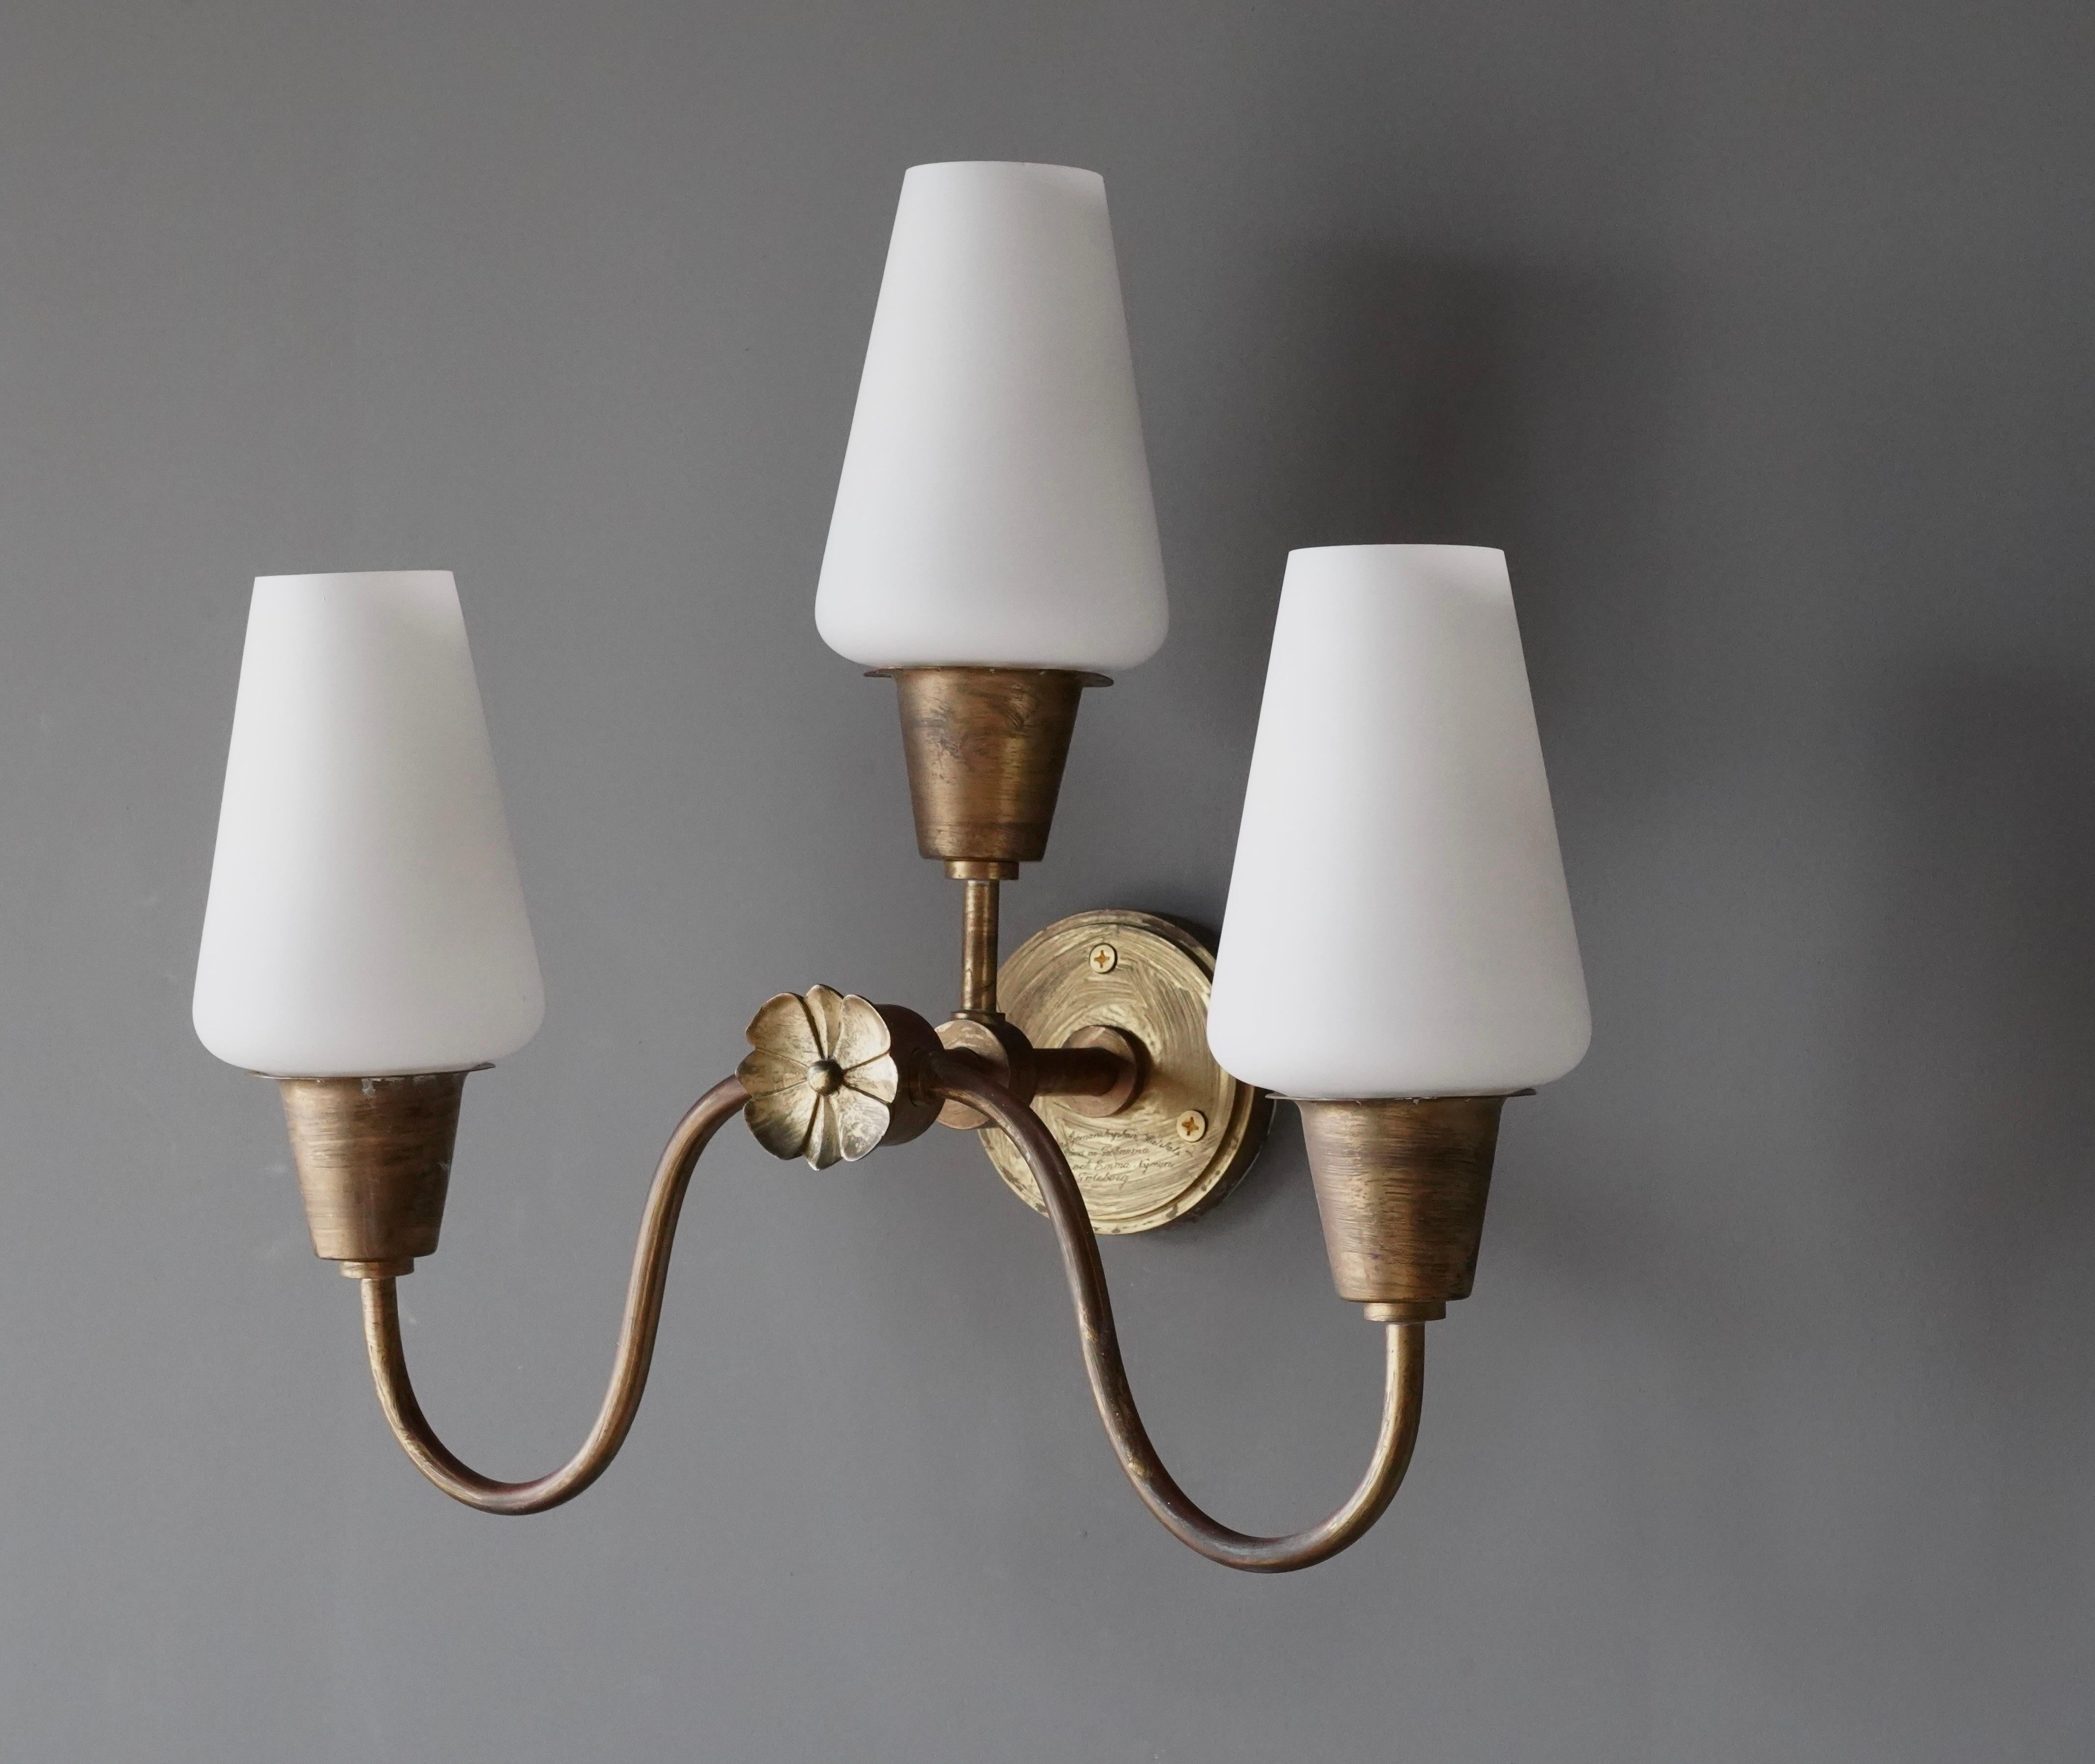 A three armed wall light. Designed and produced in Denmark, c. 1930s-1940s. Features brass and milk glass.

Fixture presents with dramatic and beautiful patina.

Three arm brass wall light with frost glass. Engraved on the front of base. Patina